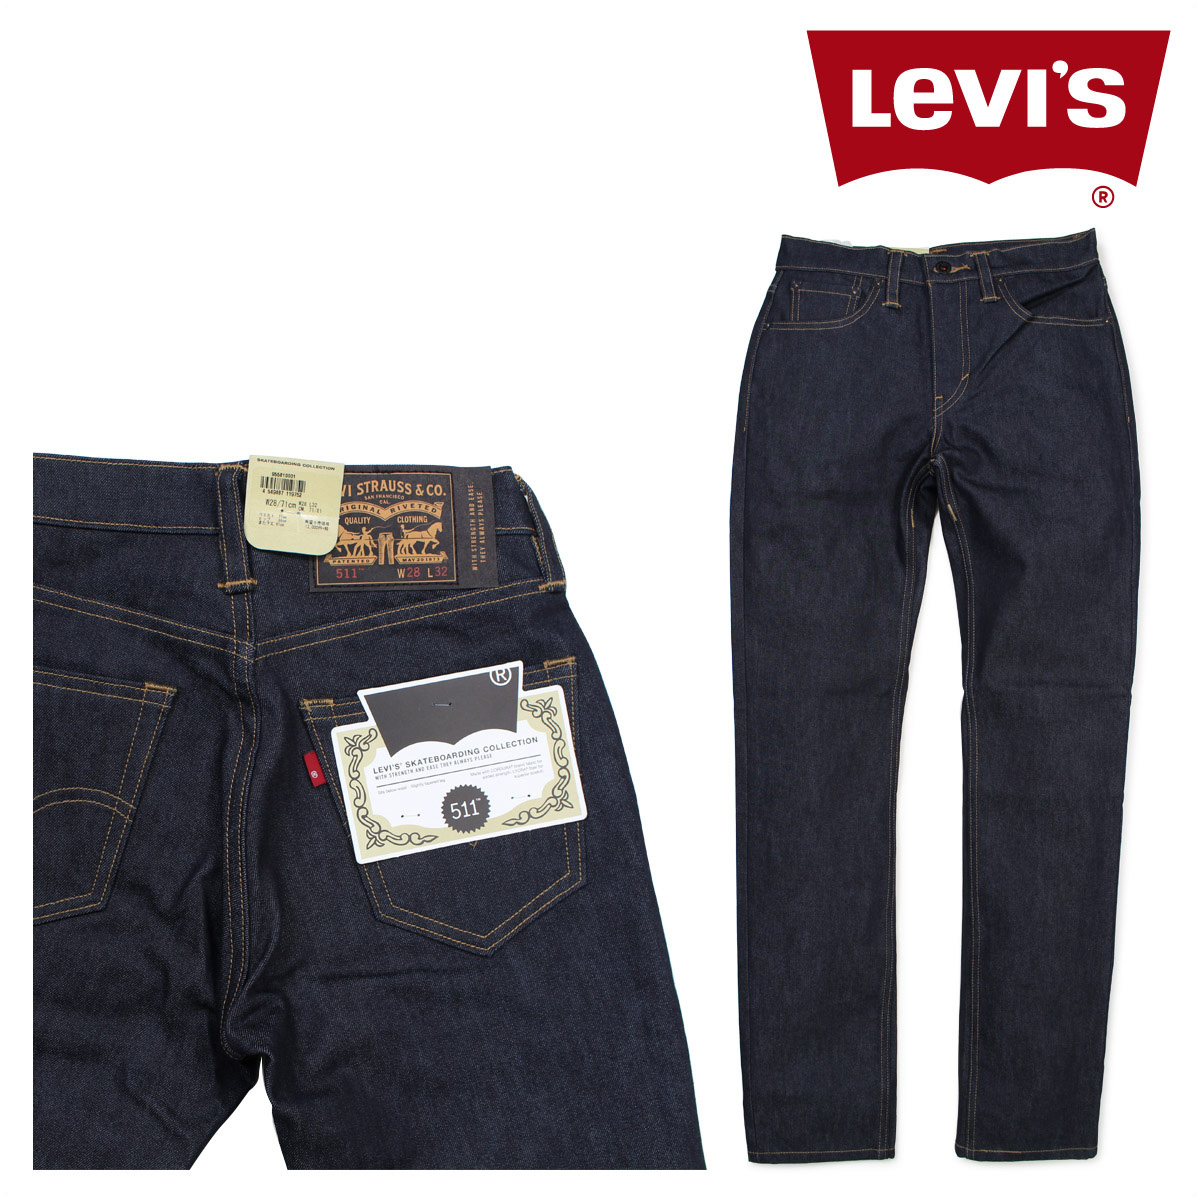 311 levi's shaping jeans